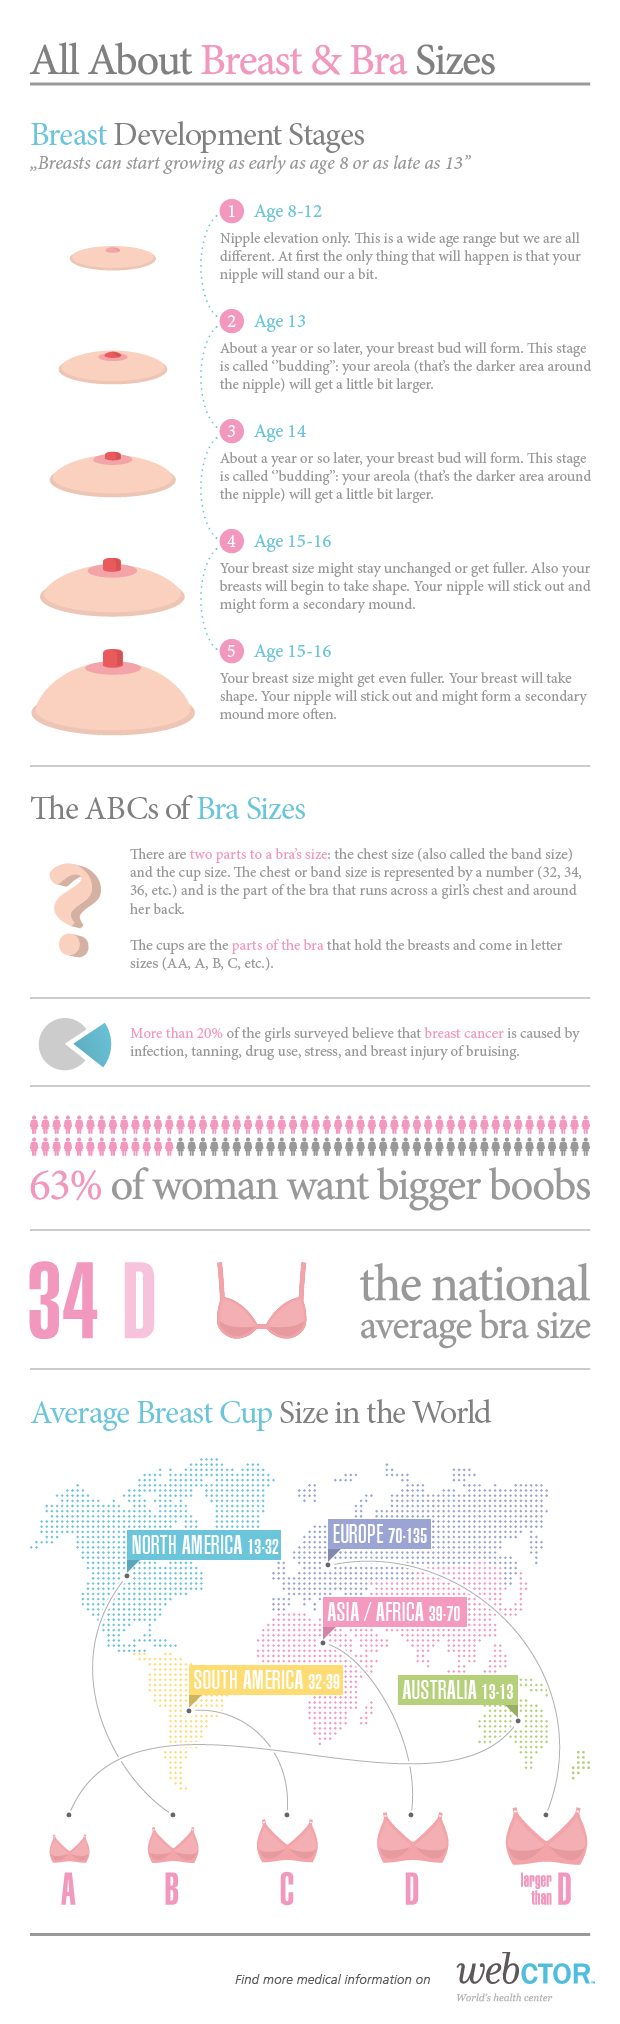 All about breasts & bra sizes